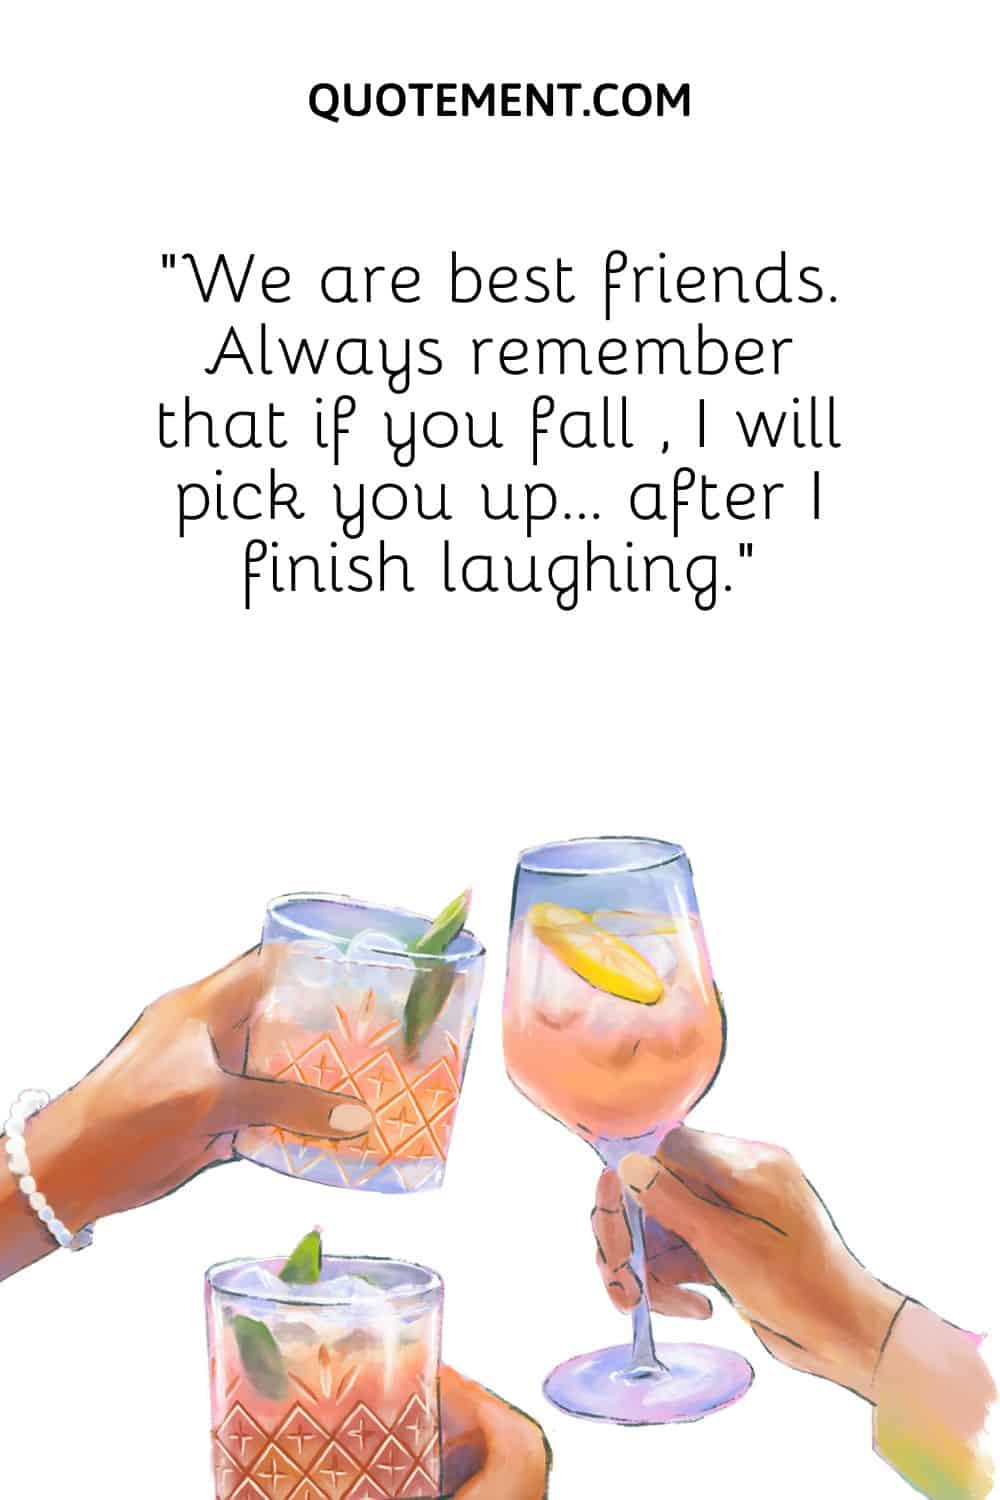 100 Awesome Quotes About Spending Time With Friends